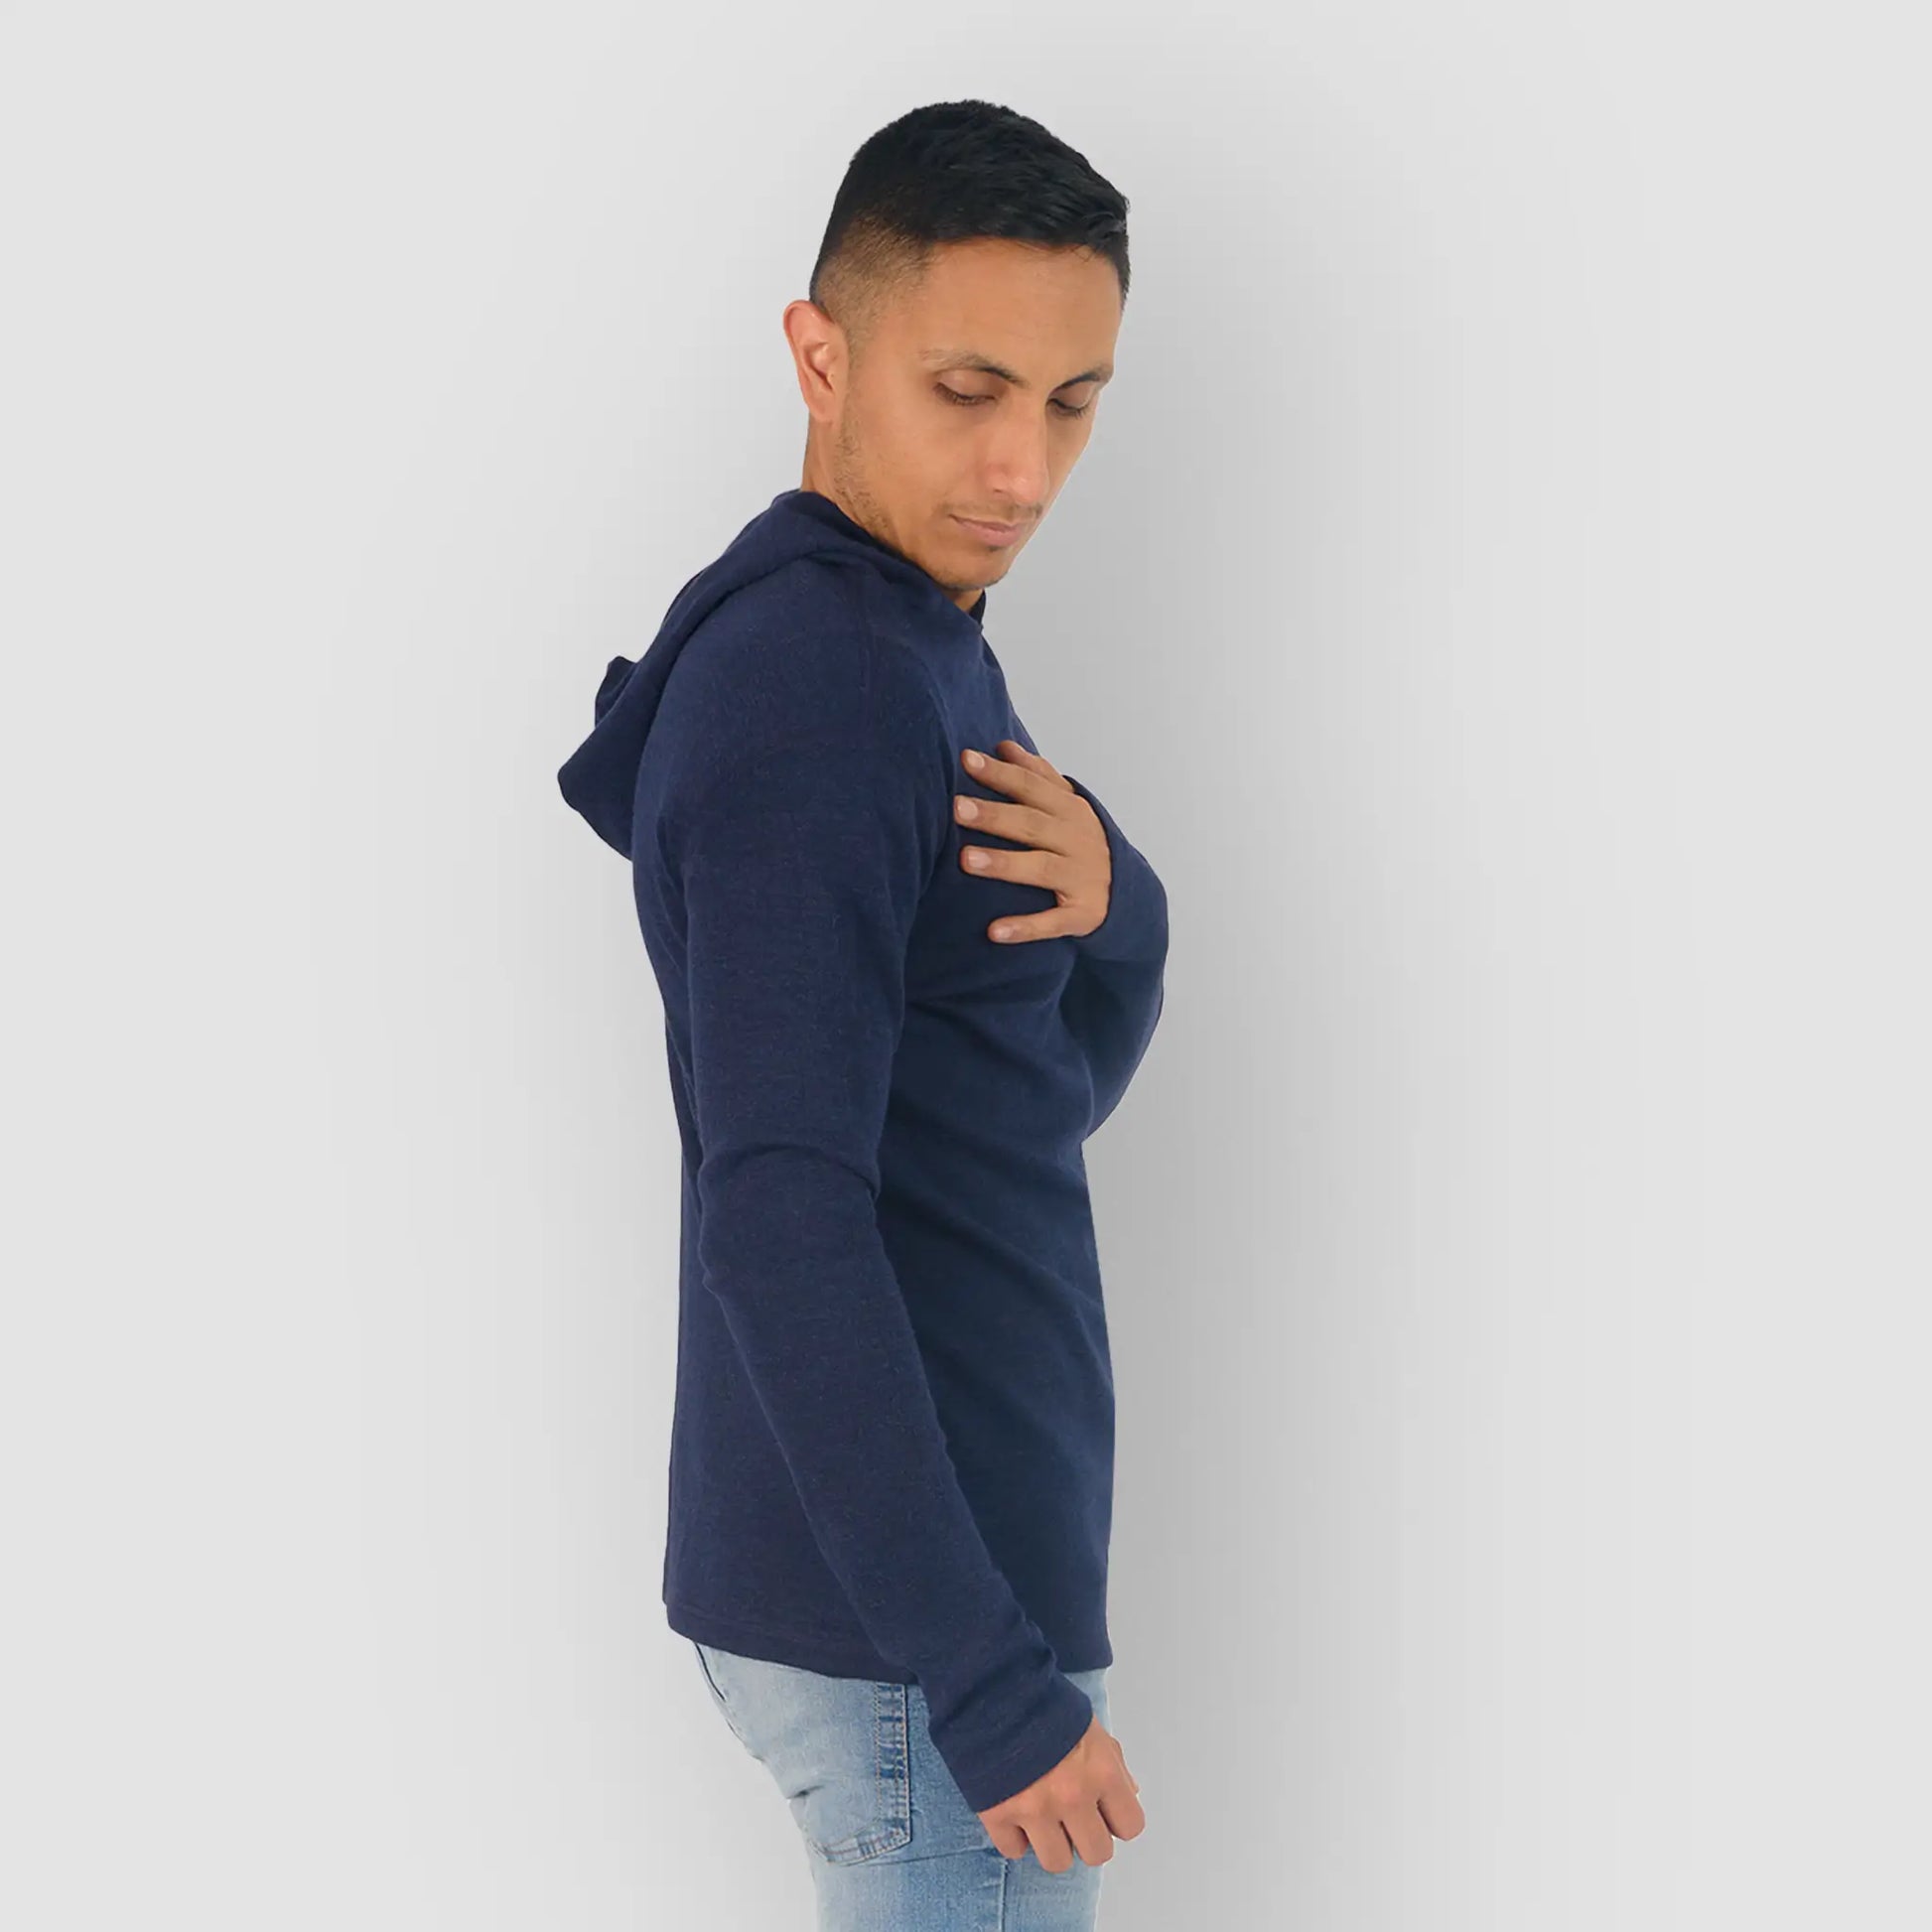 mens ecological pullover hoodie lightweight color navy blue